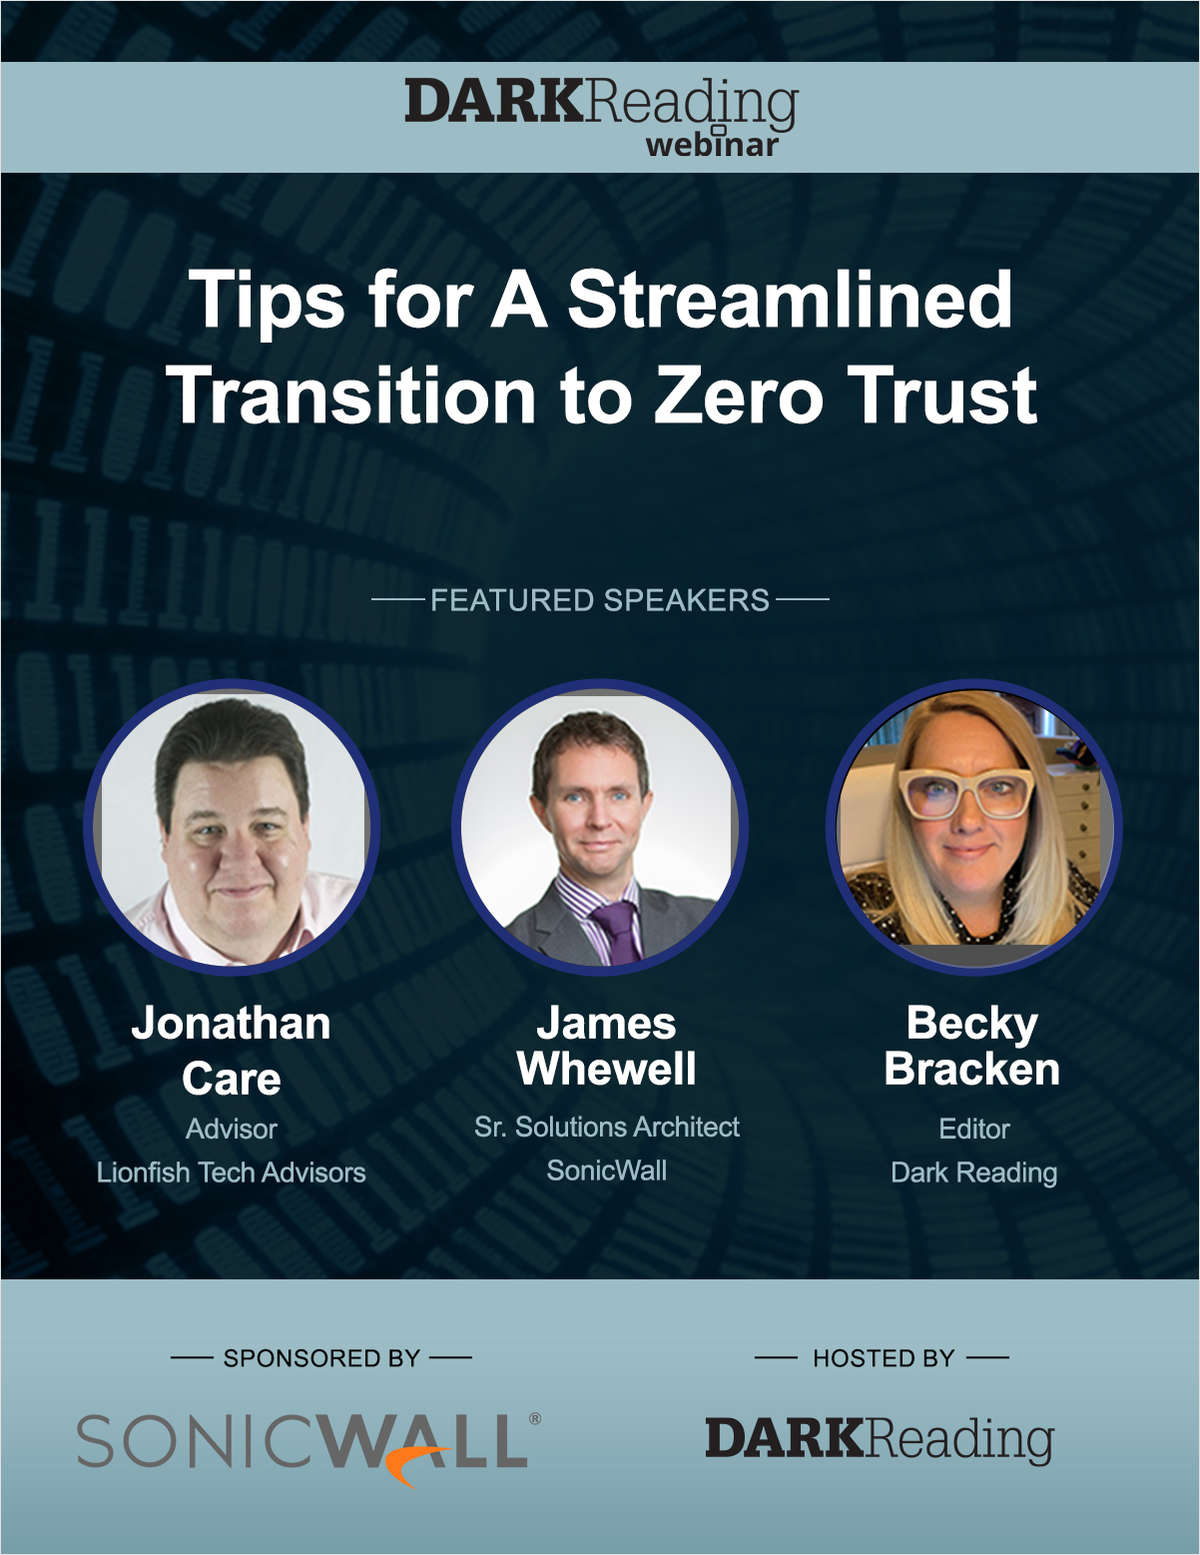 Tips for A Streamlined Transition to Zero Trust